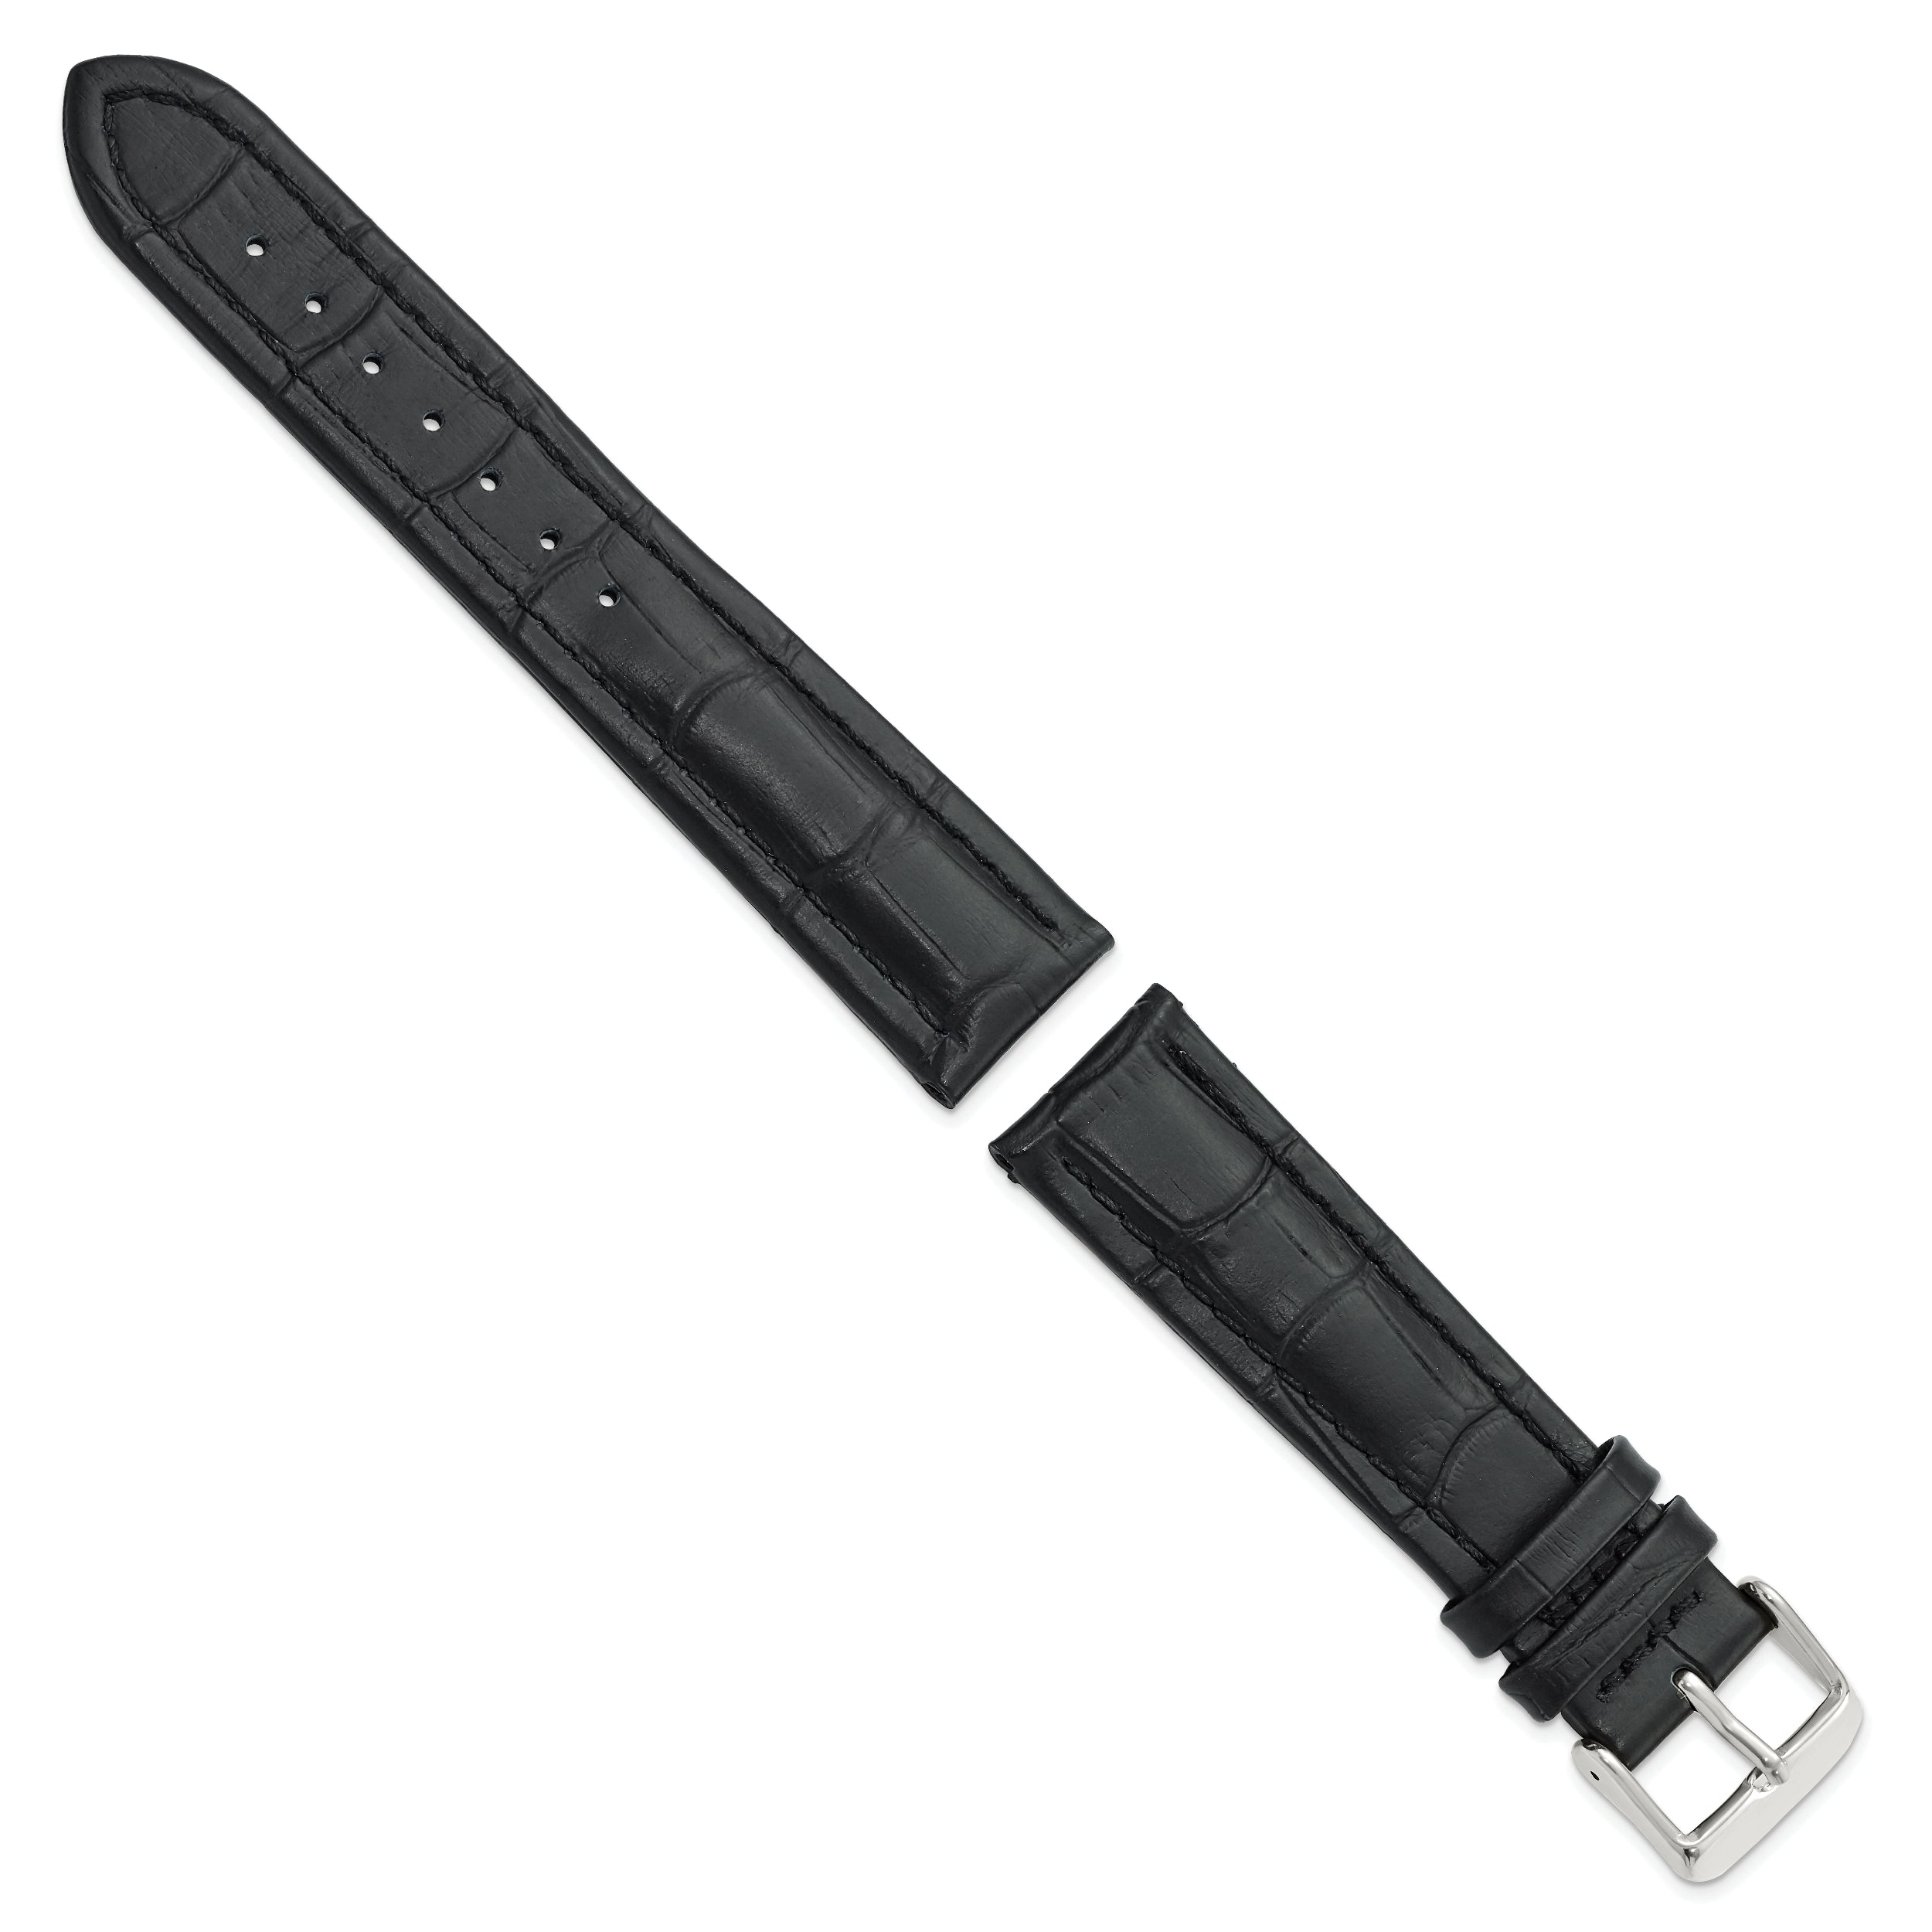 14mm Black Matte Alligator Grain Leather with Silver-tone Buckle 6.75 inch Watch Band